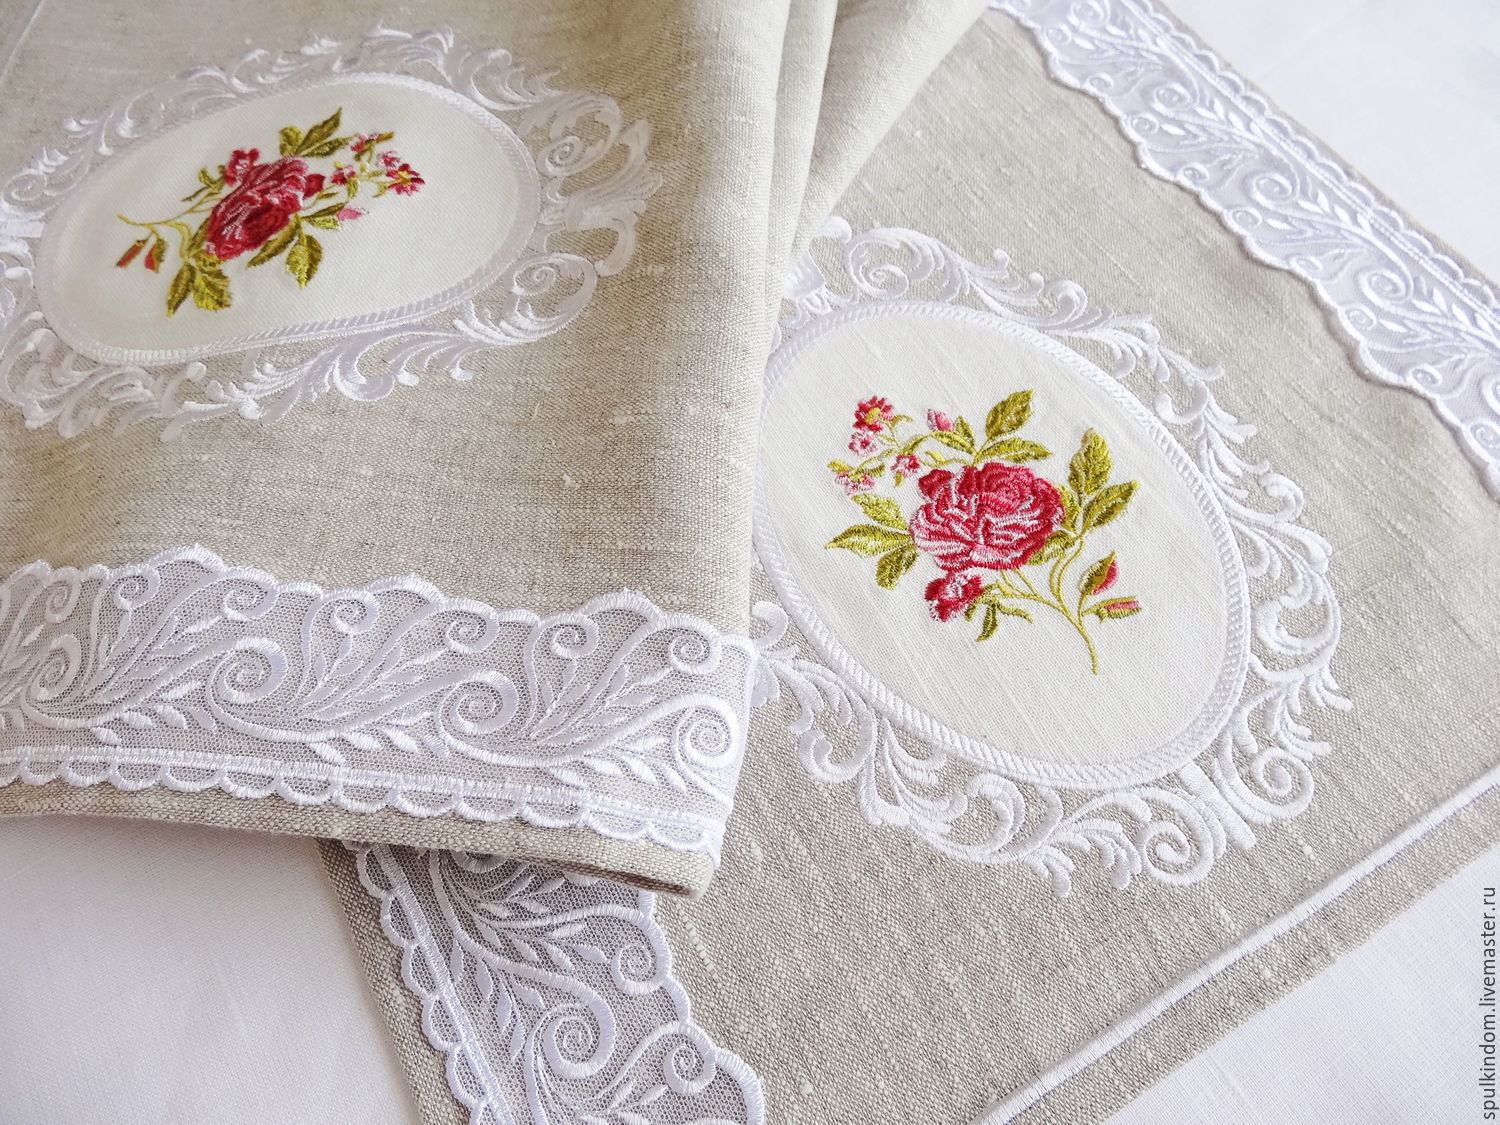 cloth napkins with embroidery